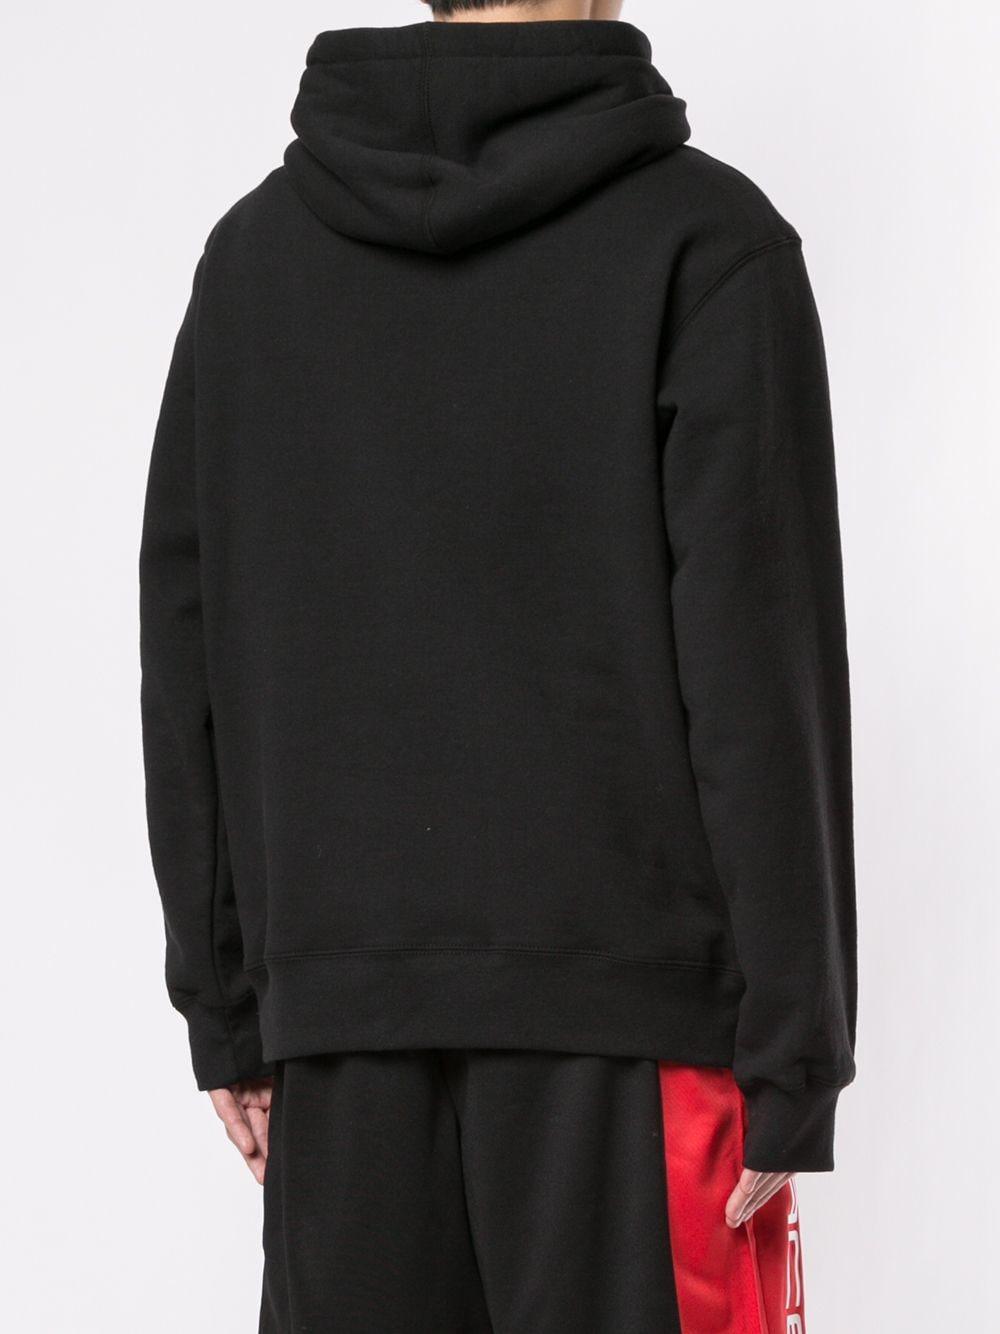 Supreme Cotton 2019 Hoodie in Black for Men - Lyst